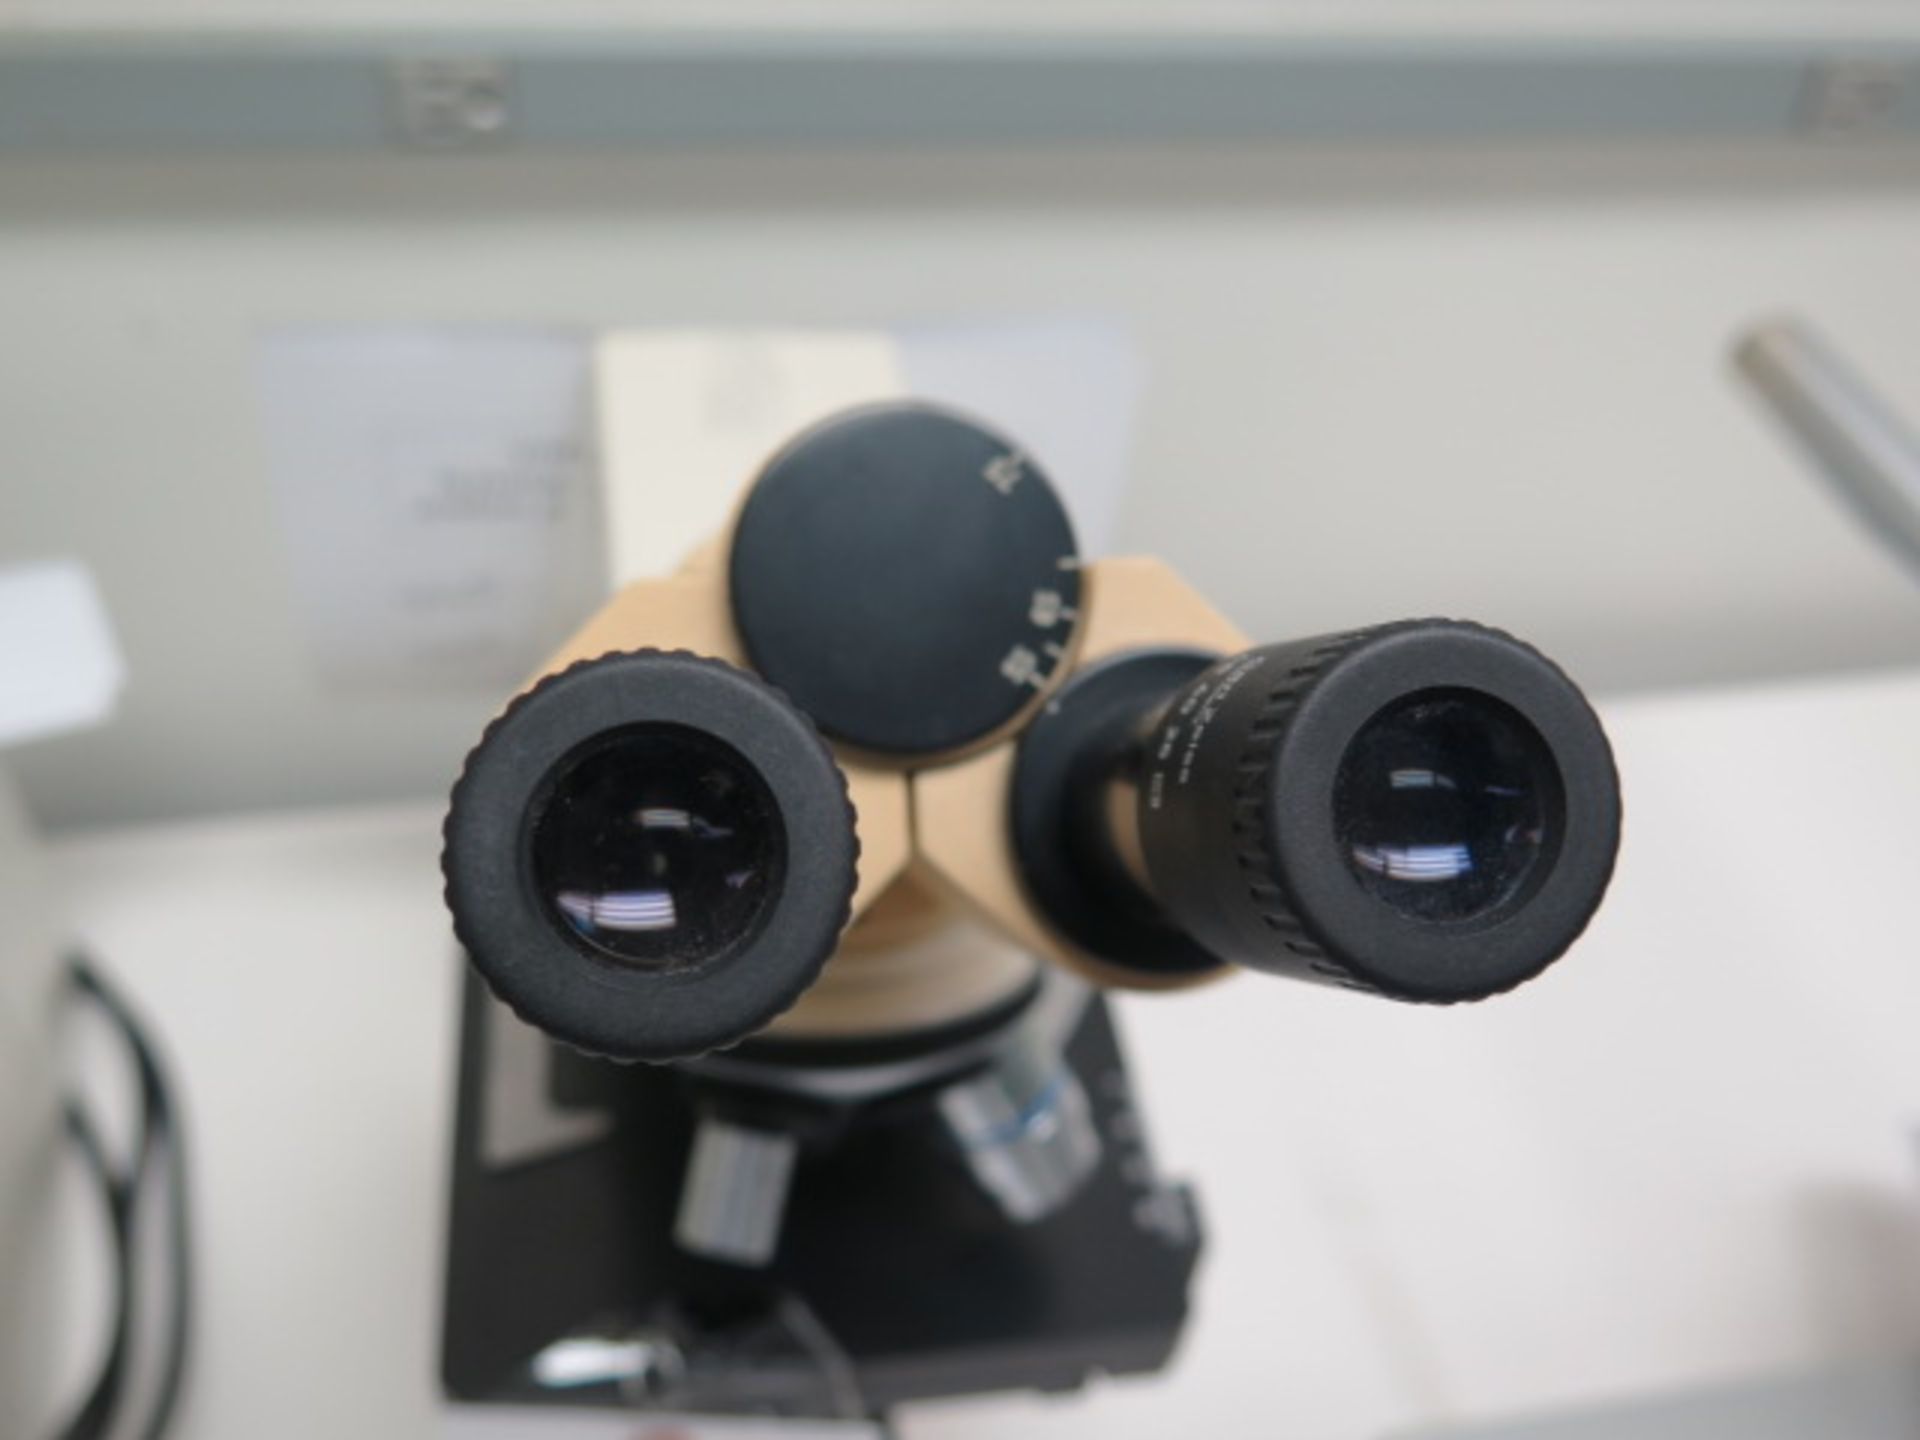 Zeiss “Standard 20” Stereo Microscope w/ 3-Objectives and Light Source (SOLD AS-IS - NO WARRANTY) - Image 5 of 9